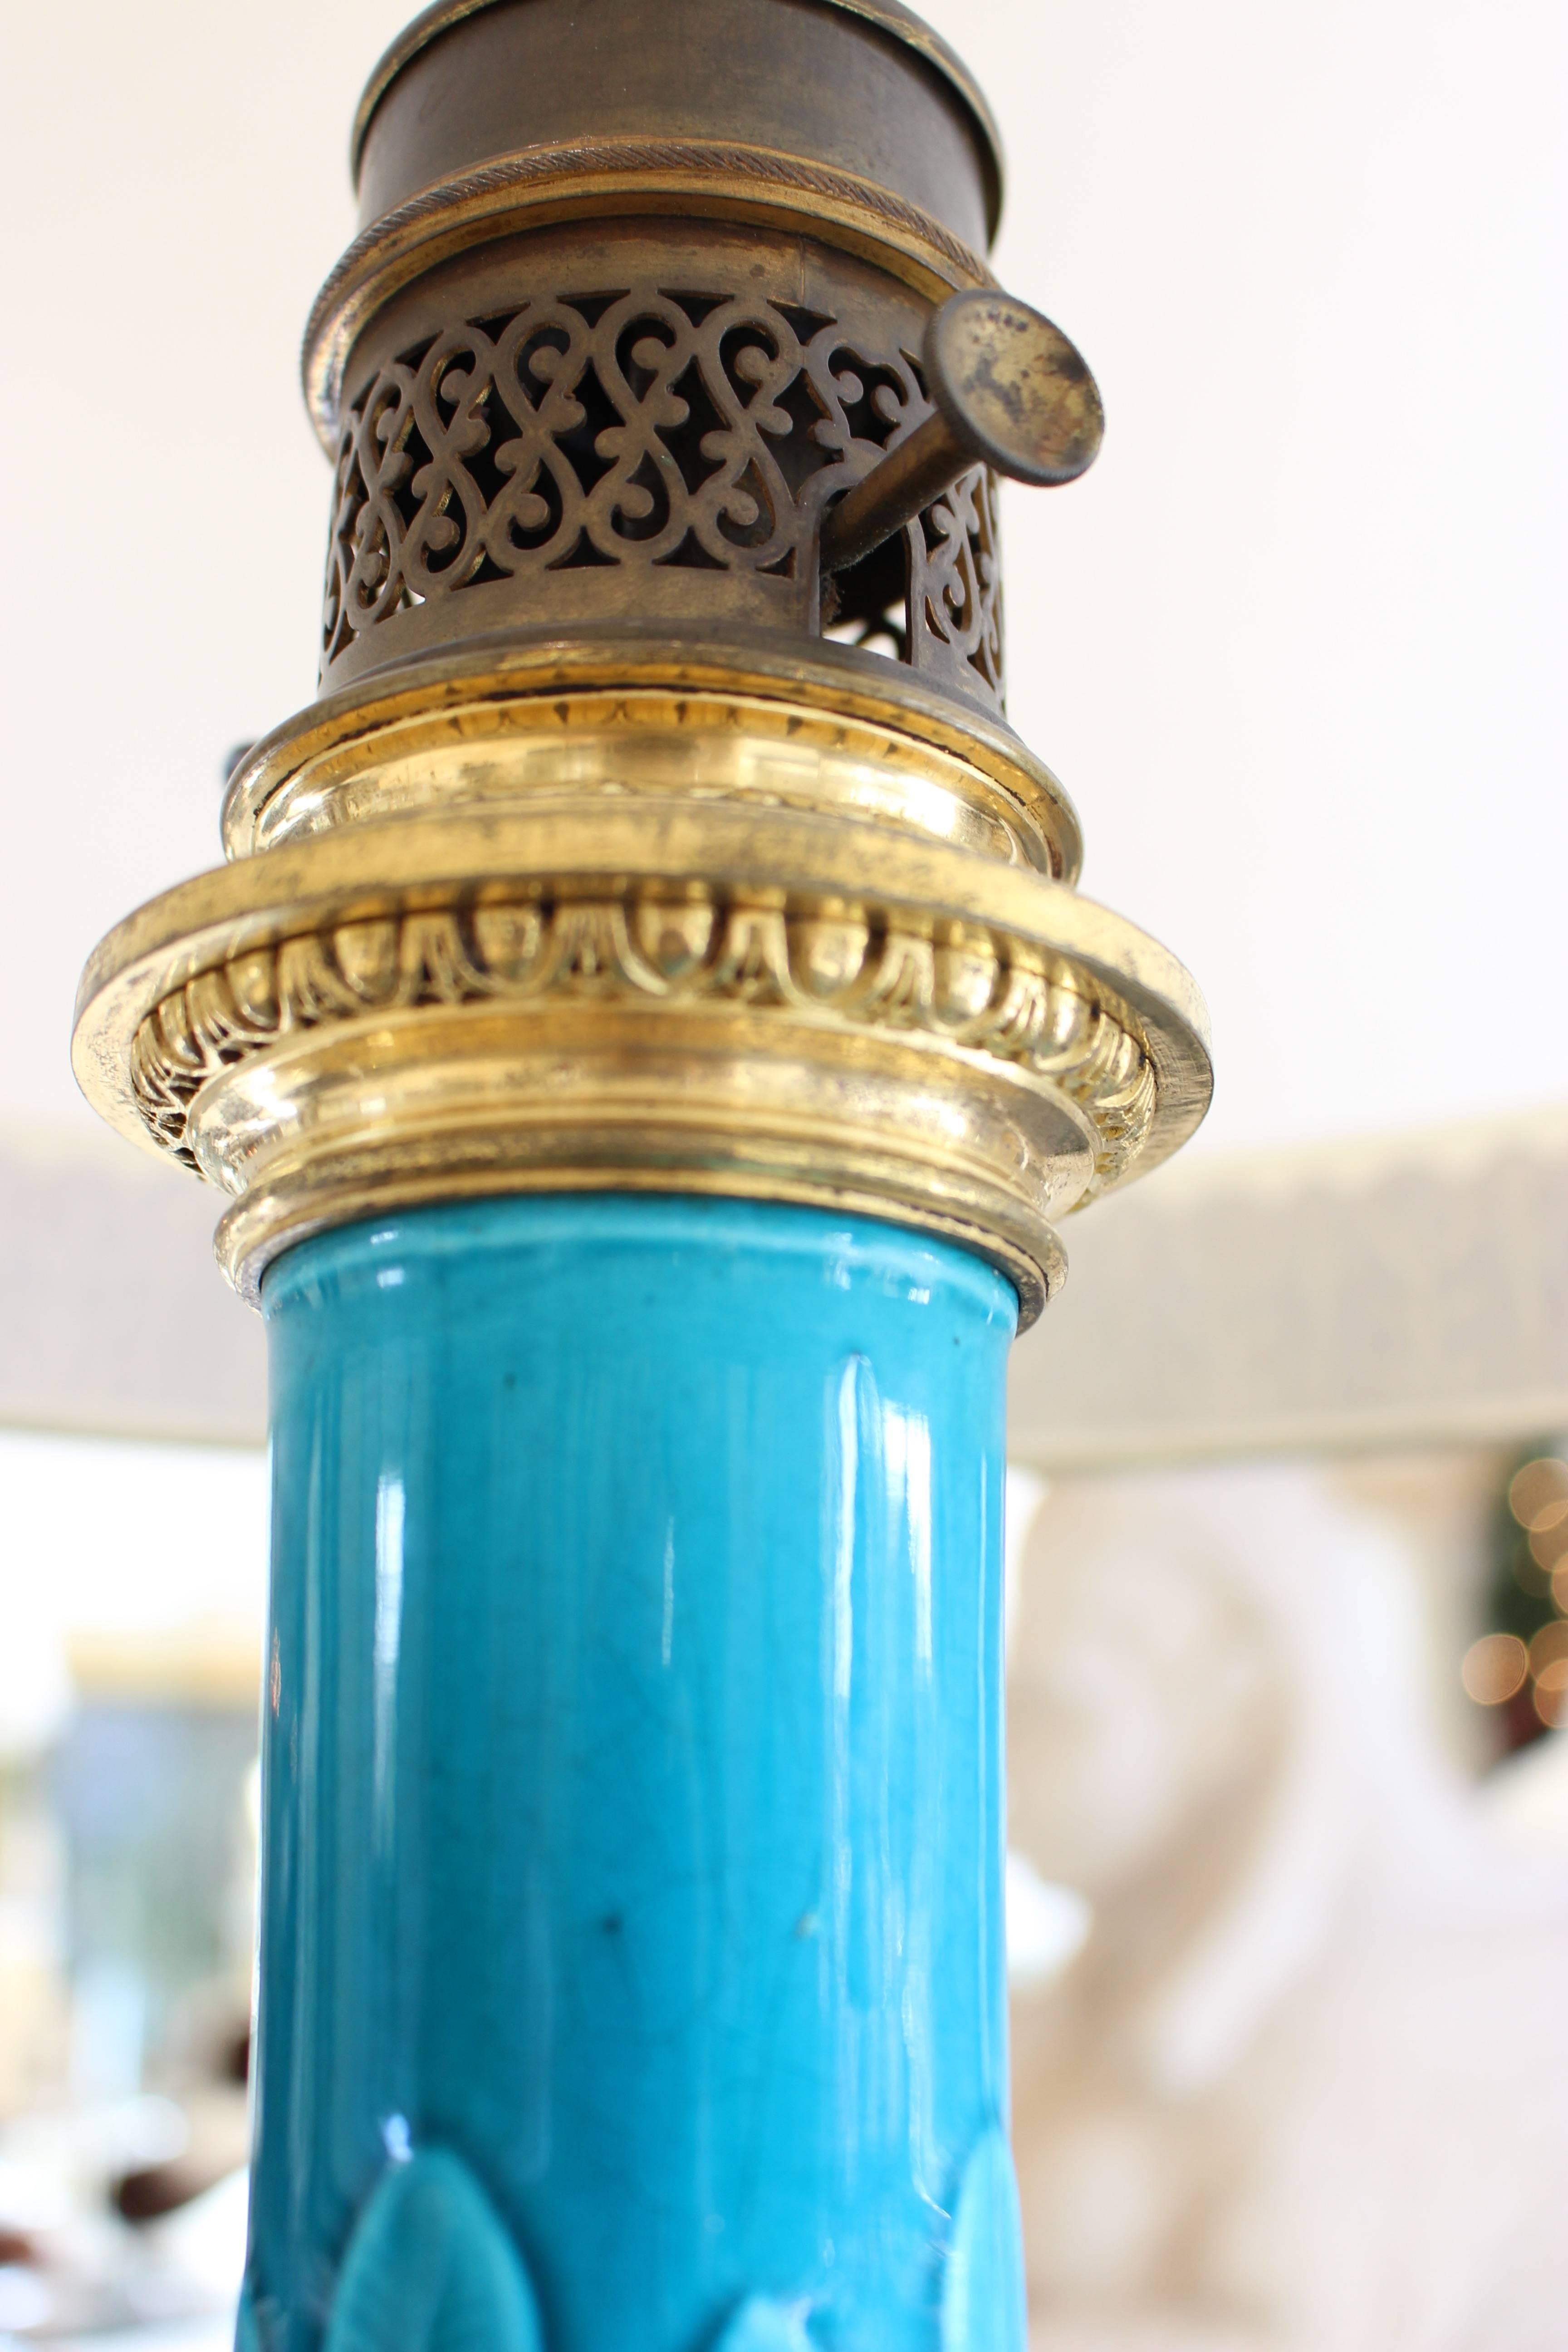 19th Century Pair of Ormolu-Mounted Theodore Deck Faience Persian-Blue Vases with Lampshades For Sale